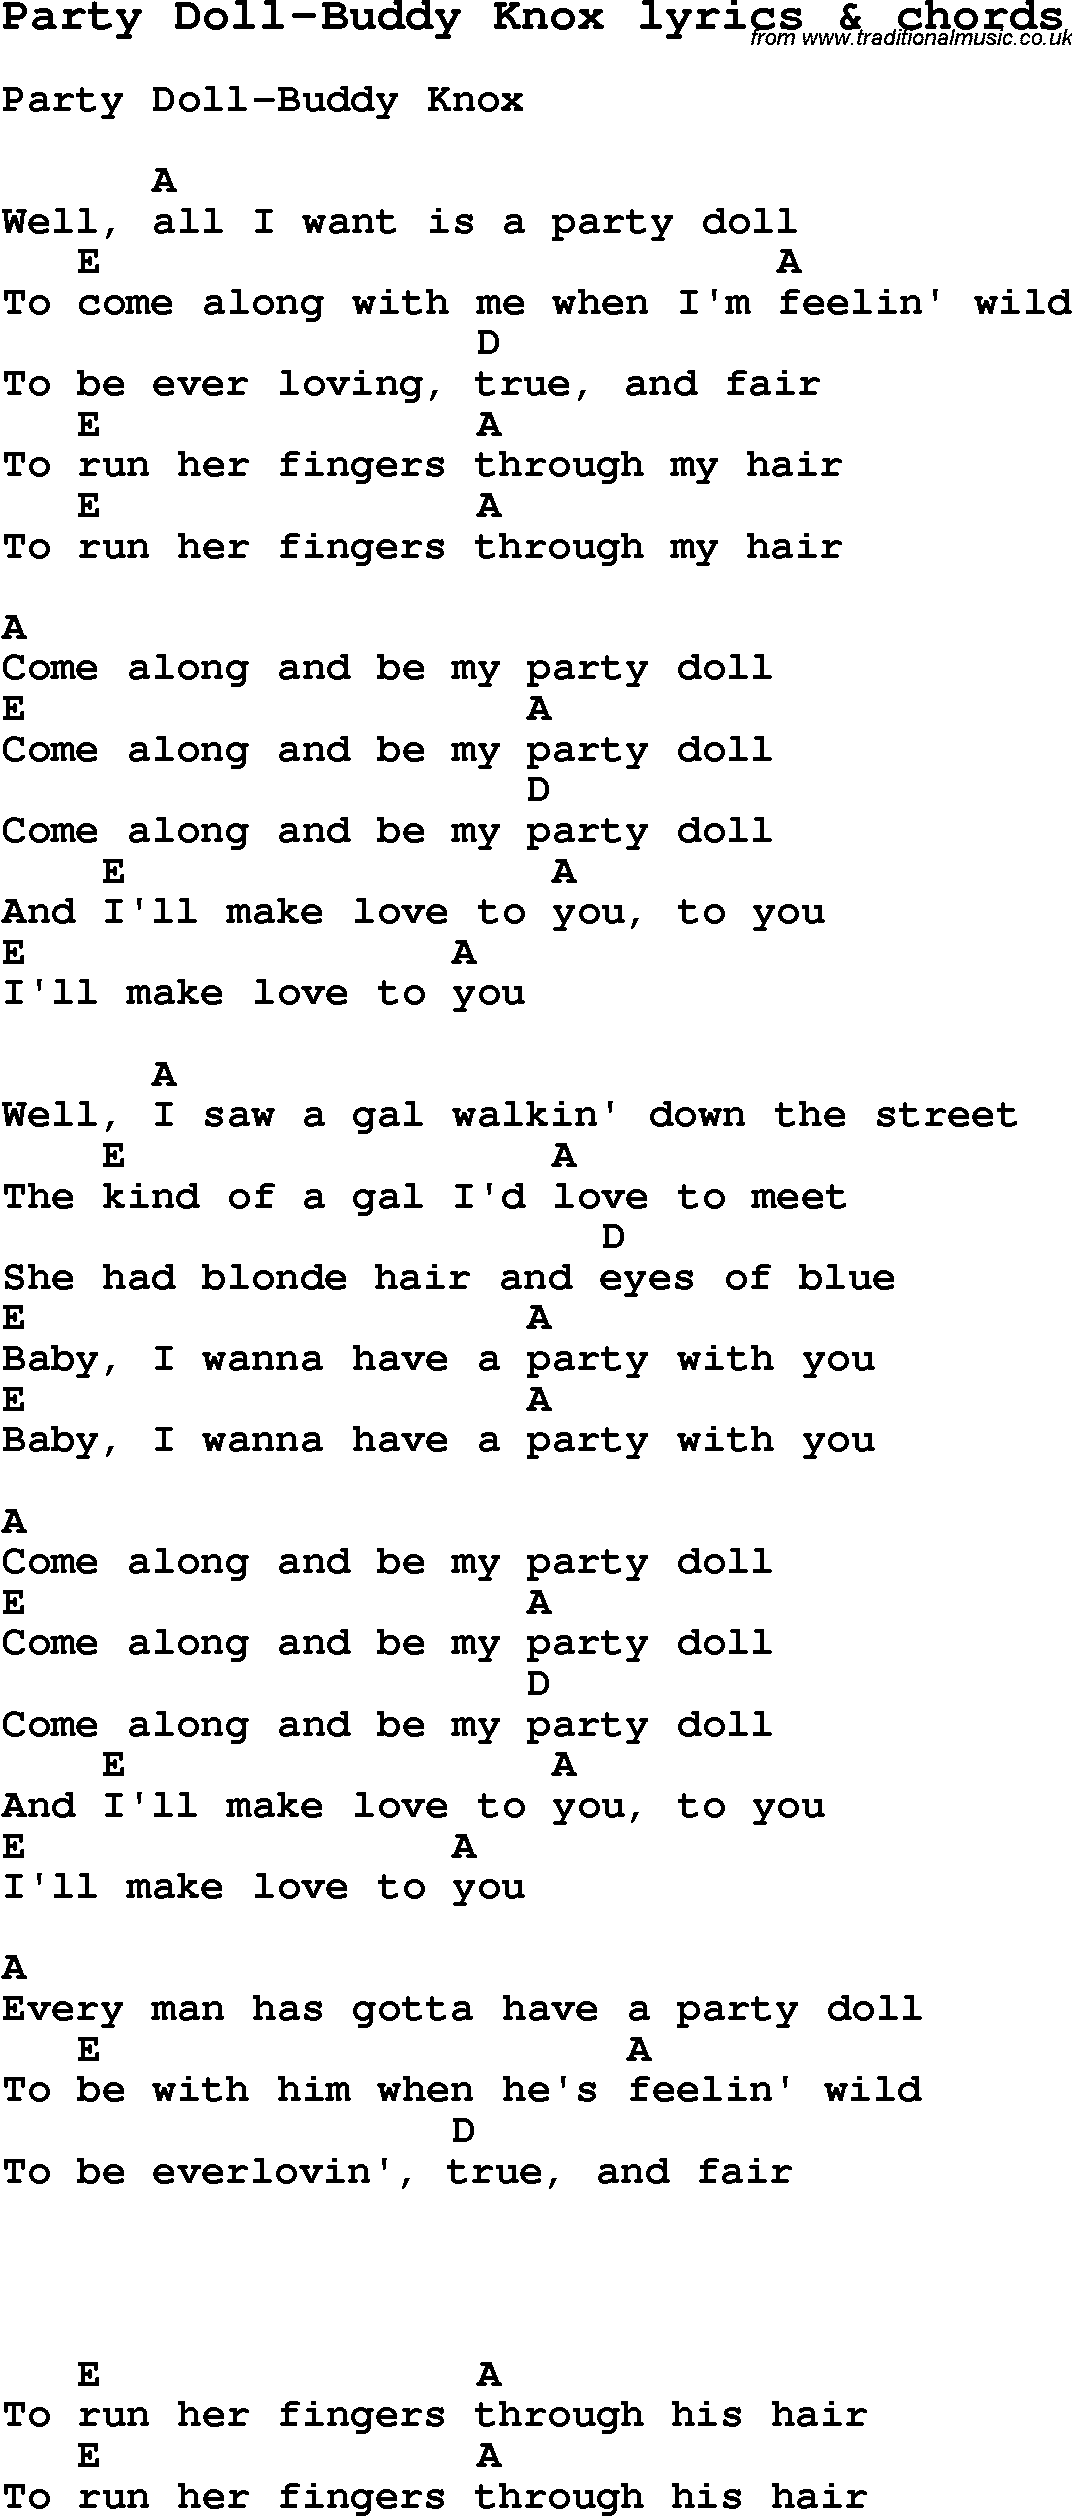 Love Song Lyrics for: Party Doll-Buddy Knox with chords for Ukulele, Guitar Banjo etc.